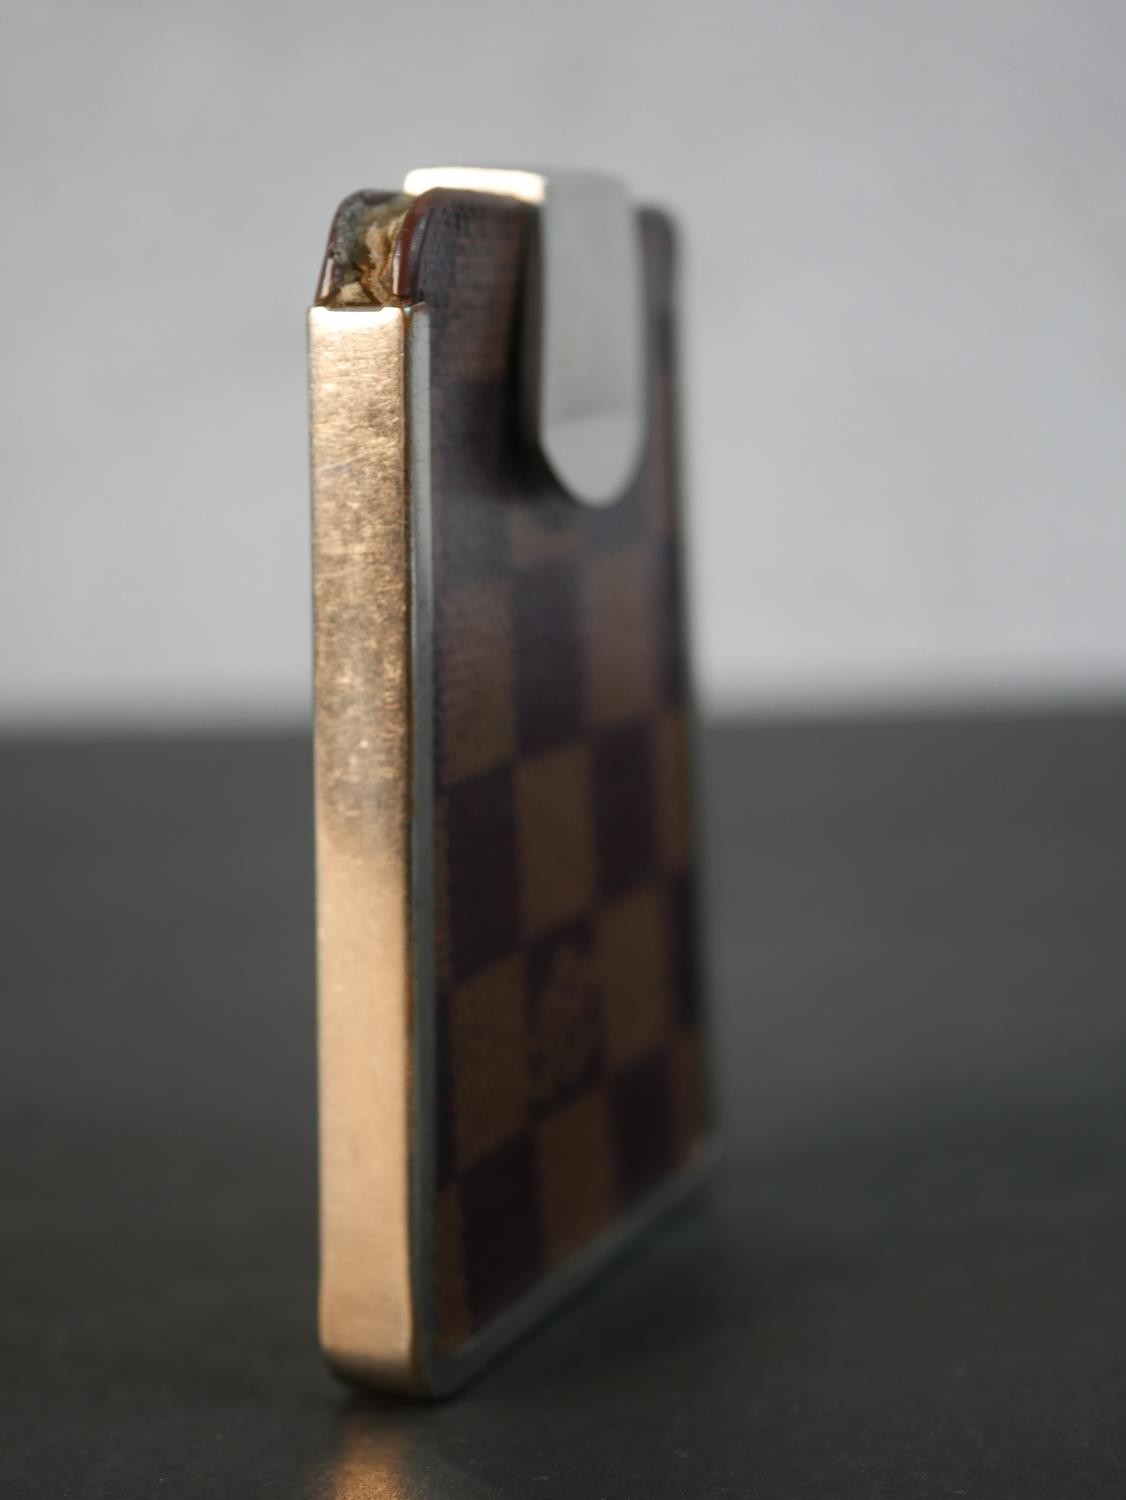 A vintage Louis Vuitton checkerboard design card holder with silver coloured metal hinge clasp and - Image 4 of 6